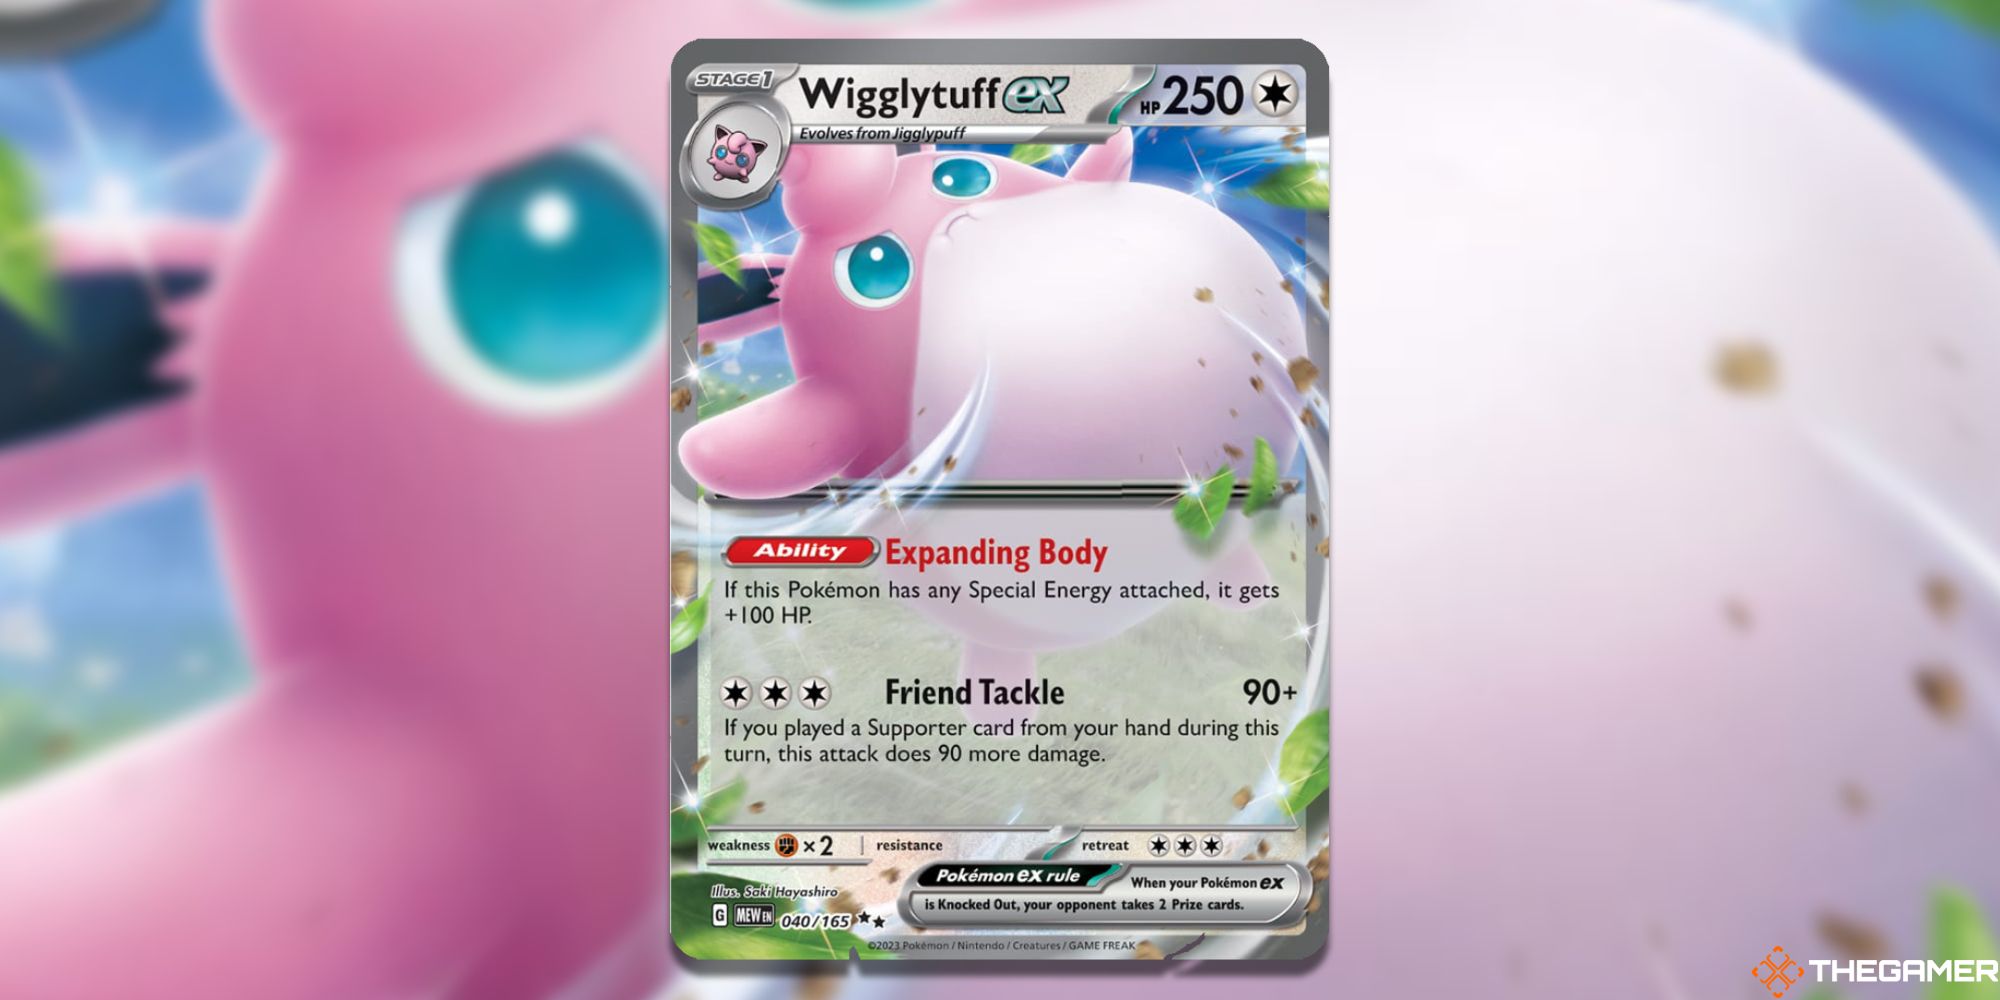 Image of the Wigglytuff ex card in Magic: The Gathering, with art by Soki Hayashior